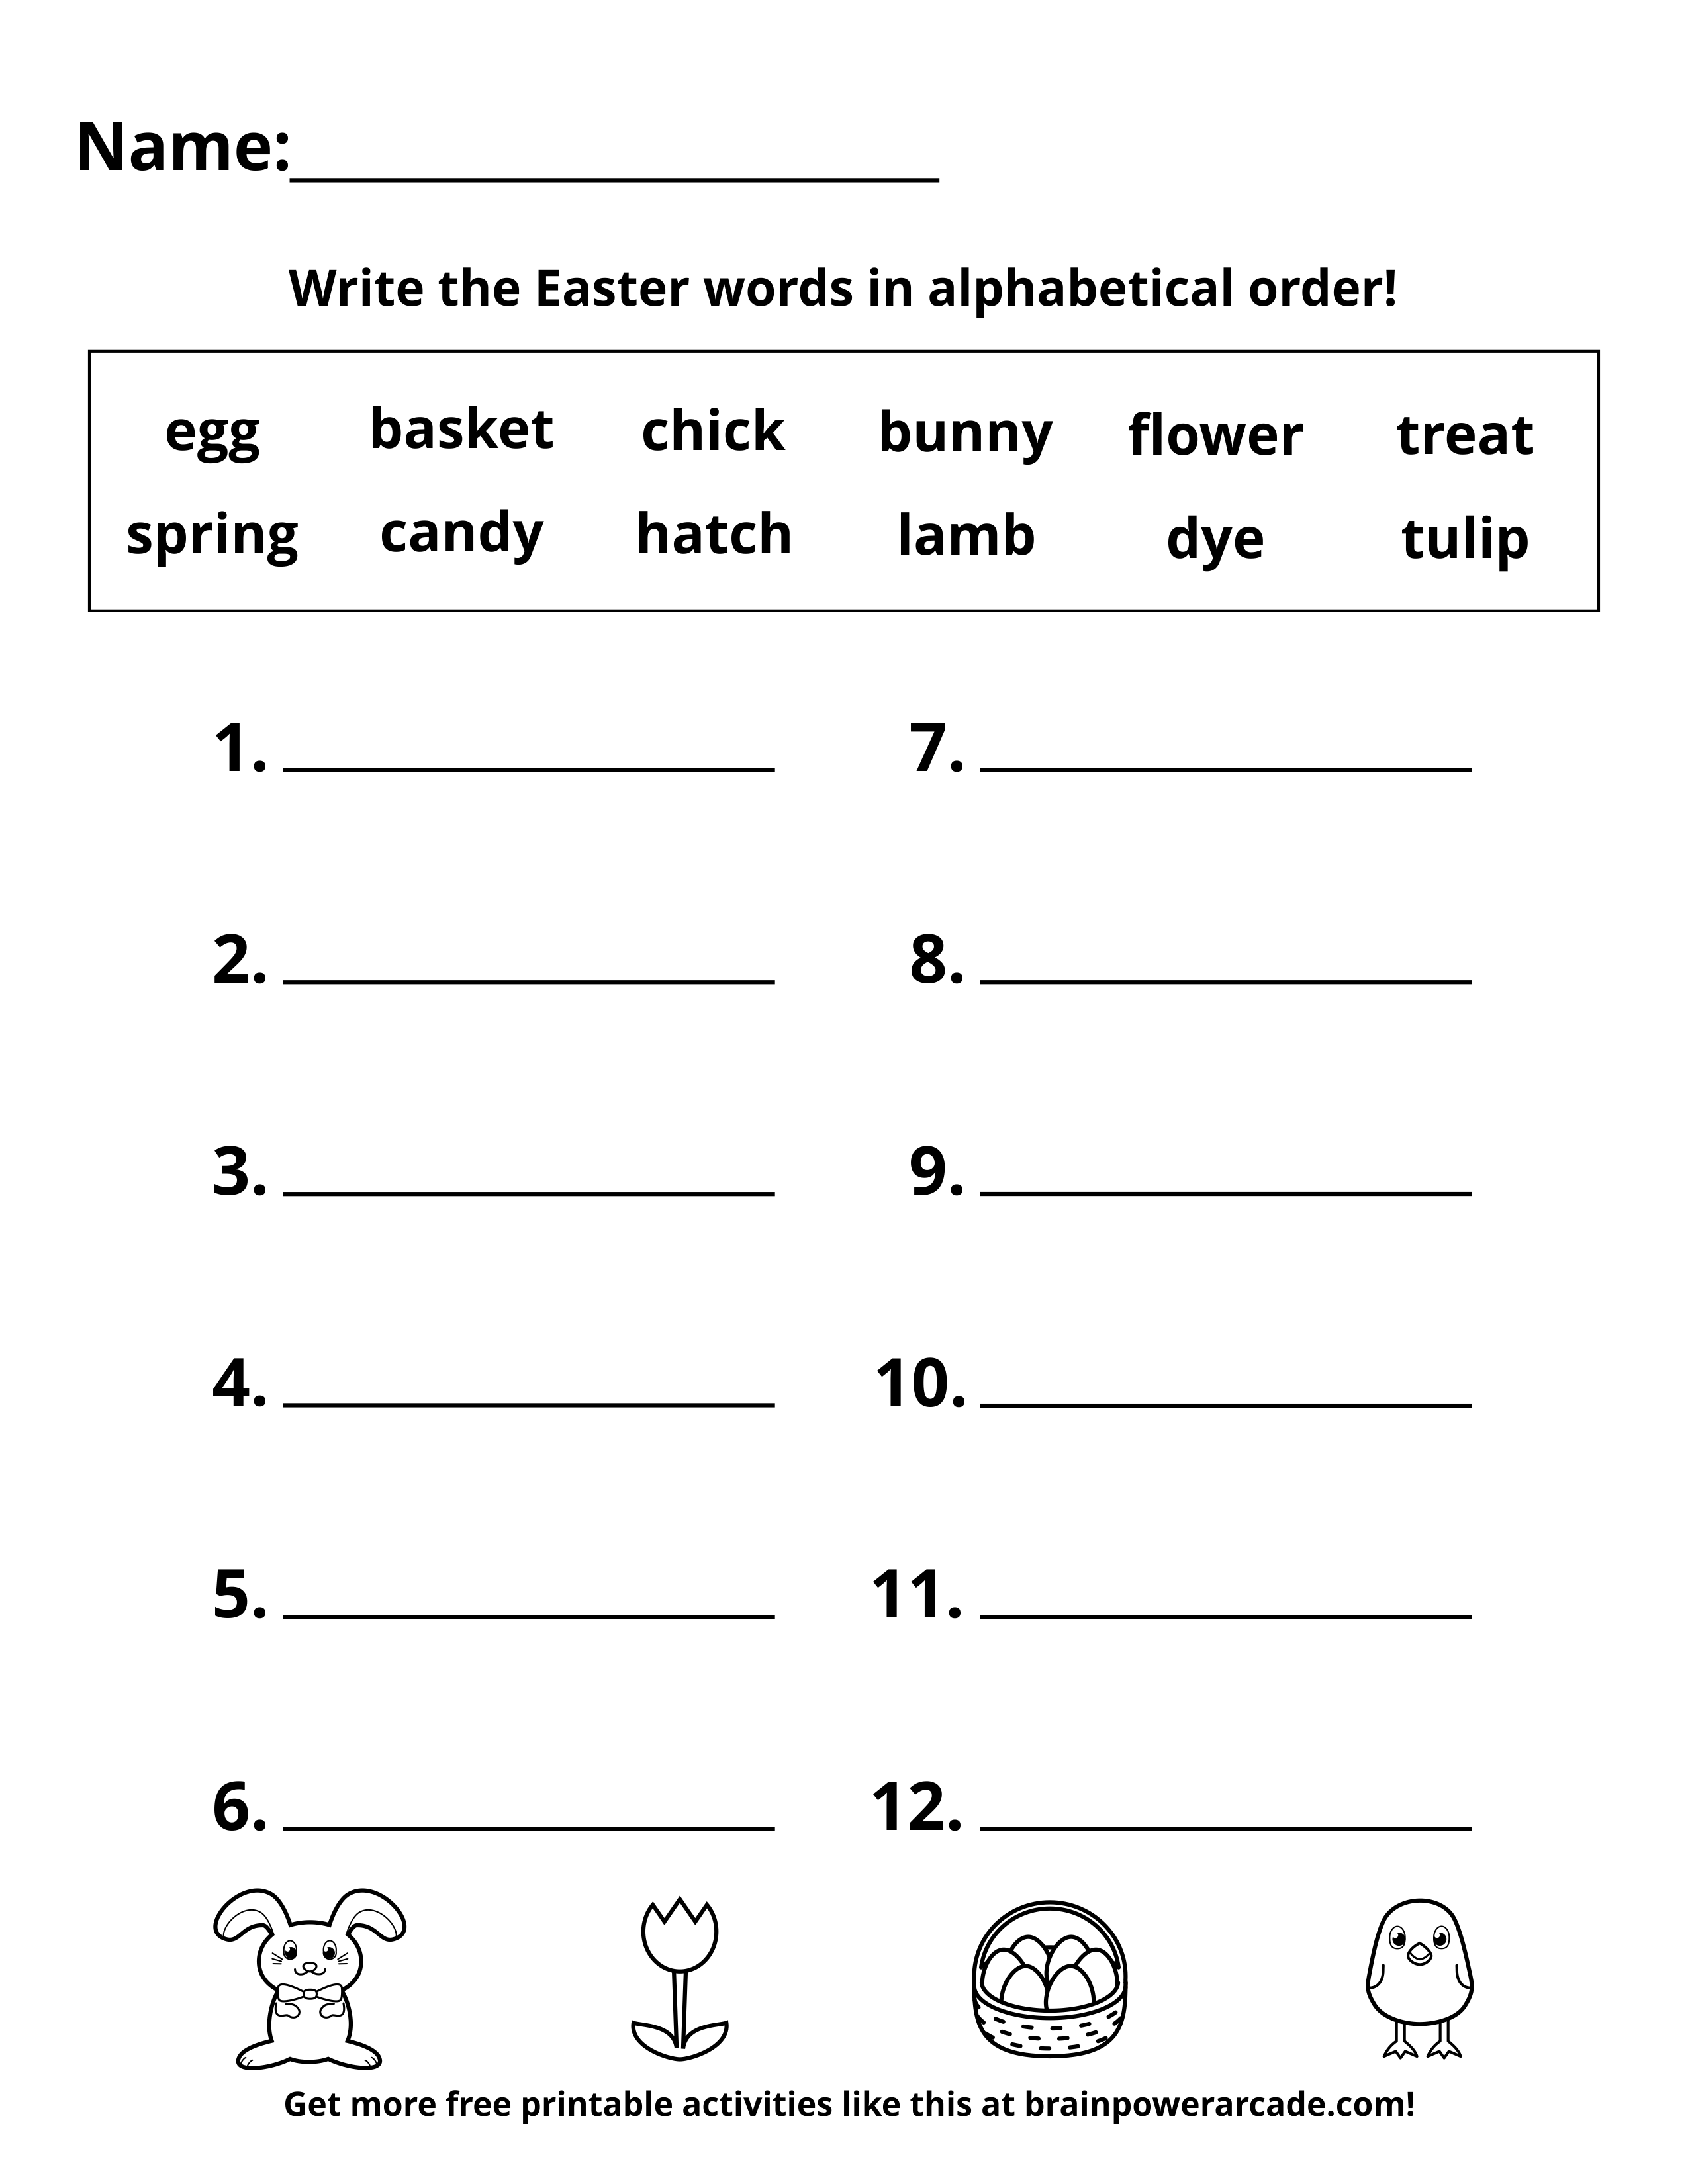 Write the Easter Words in Alphabetical Order